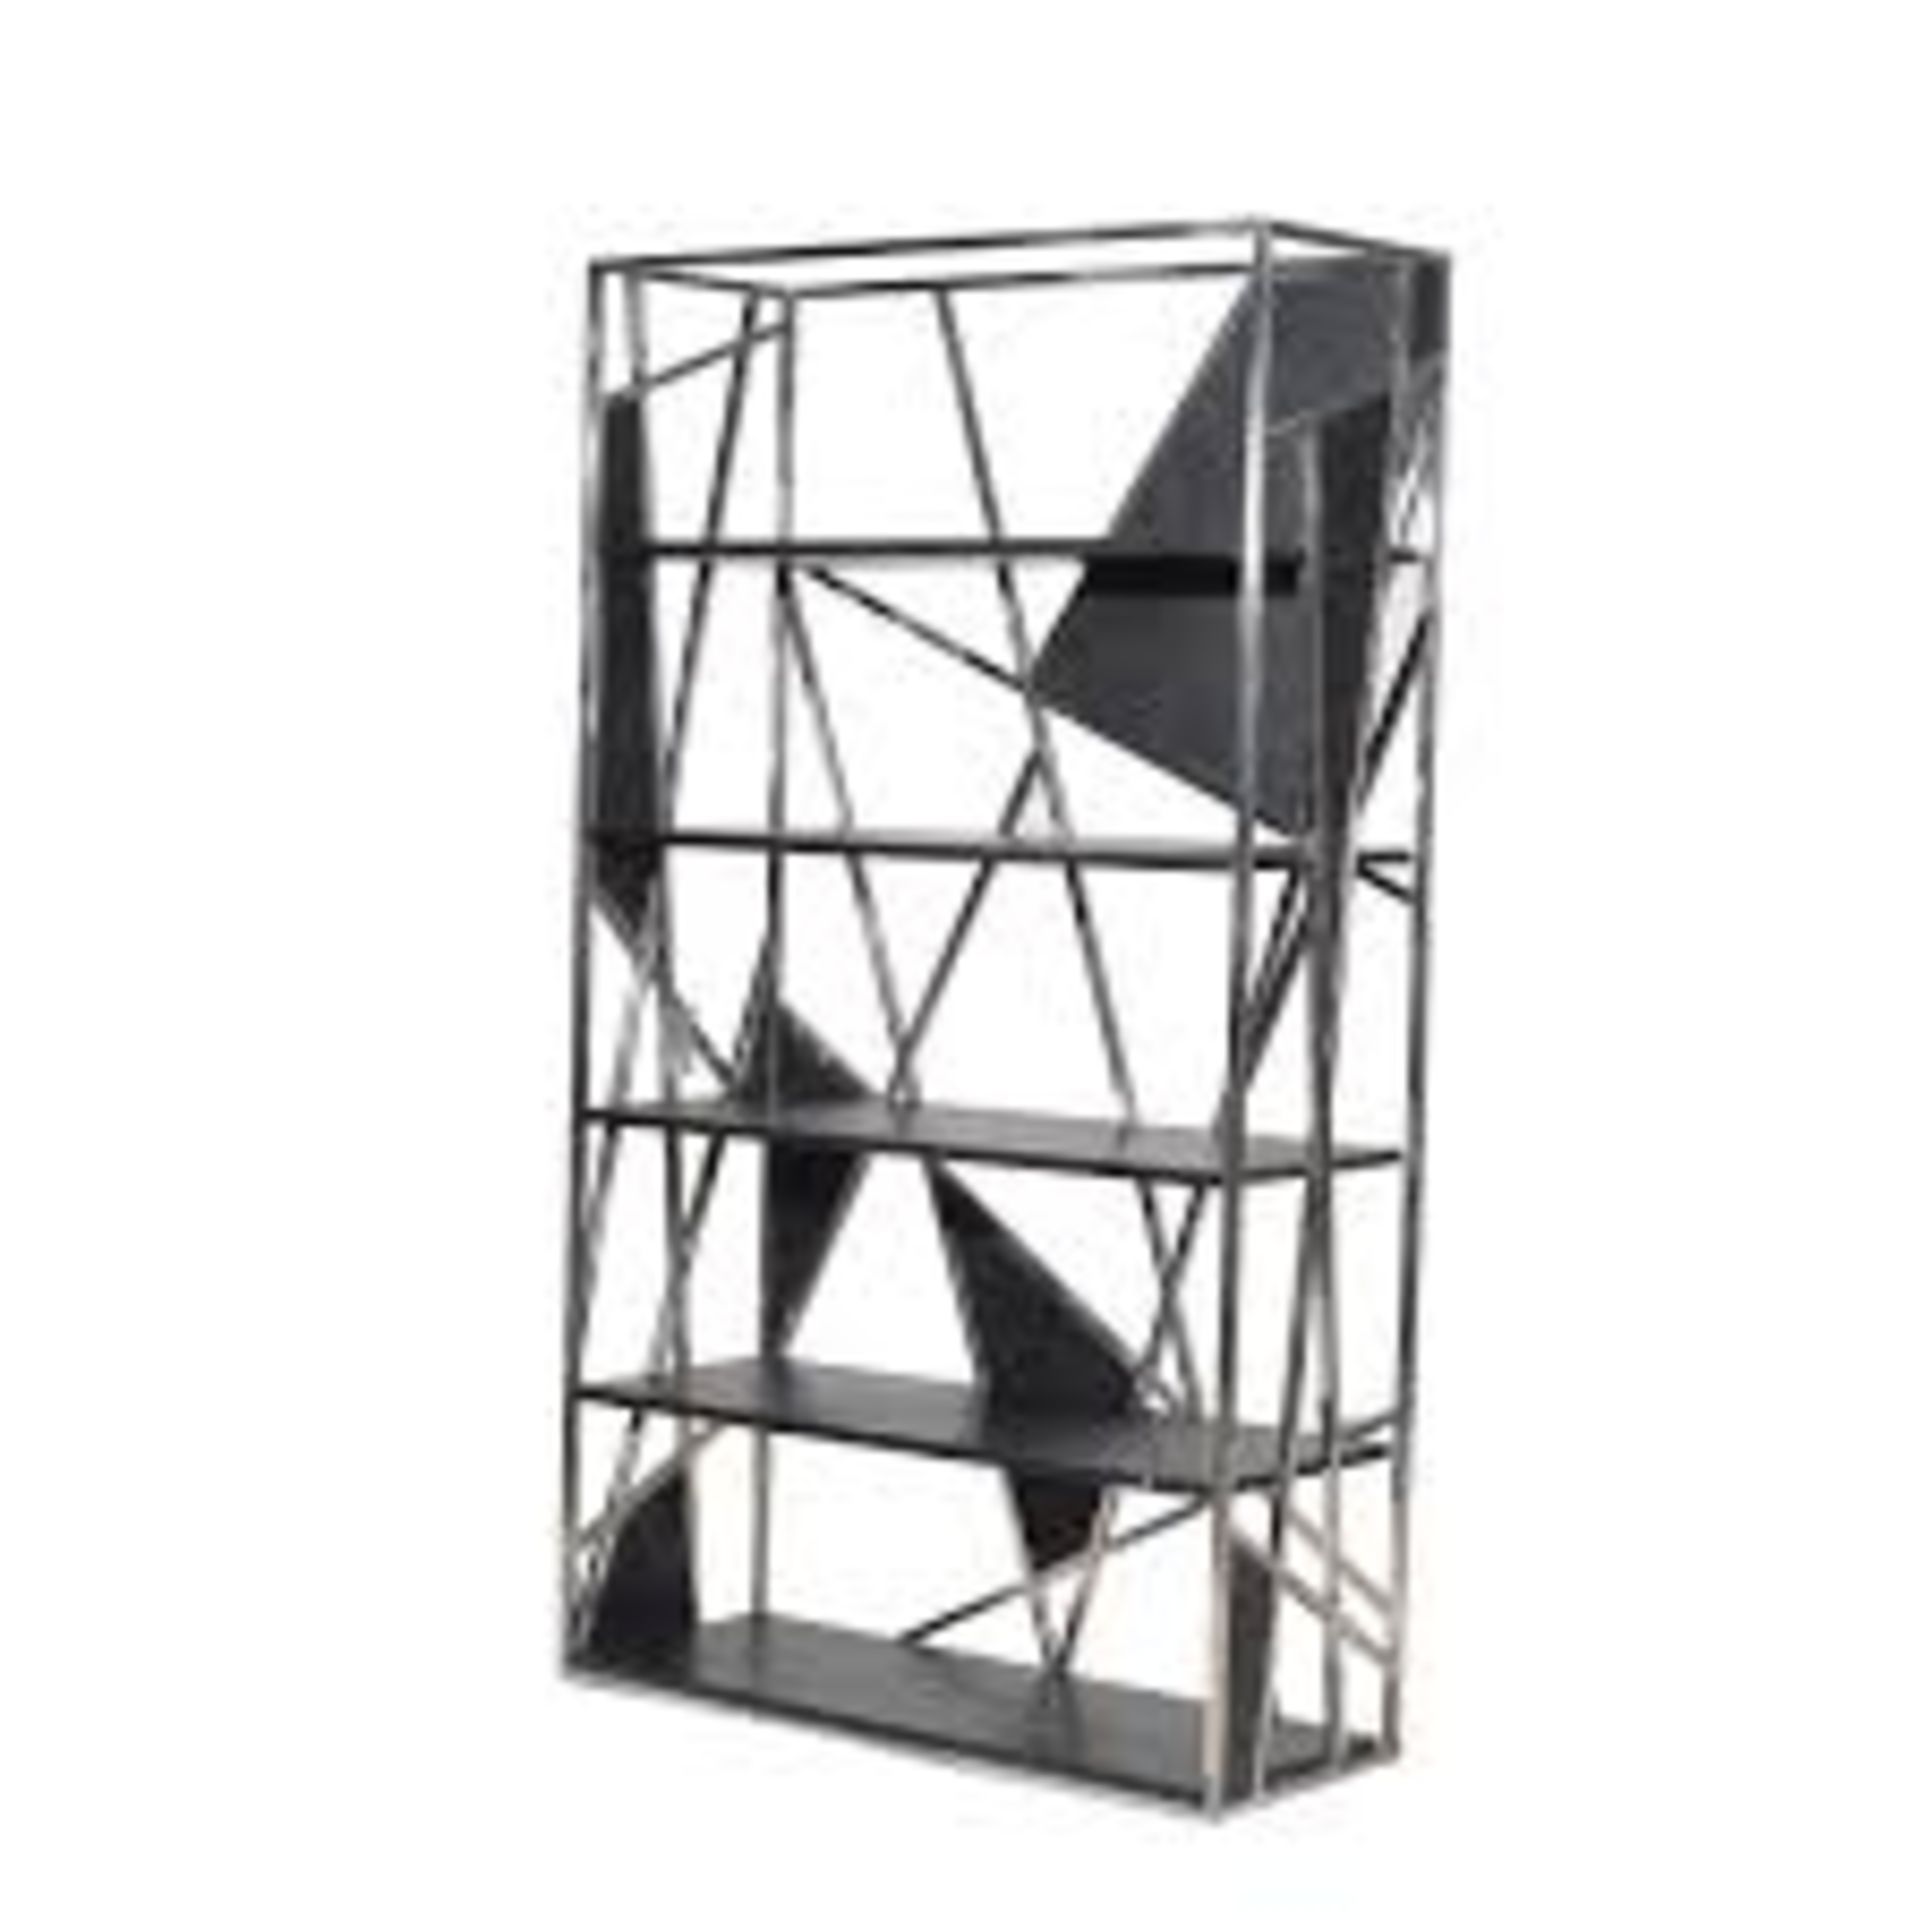 Spider's Web Bookcase Black Leather & Steel Frame 120 X 45 X 211cm - Image 2 of 2